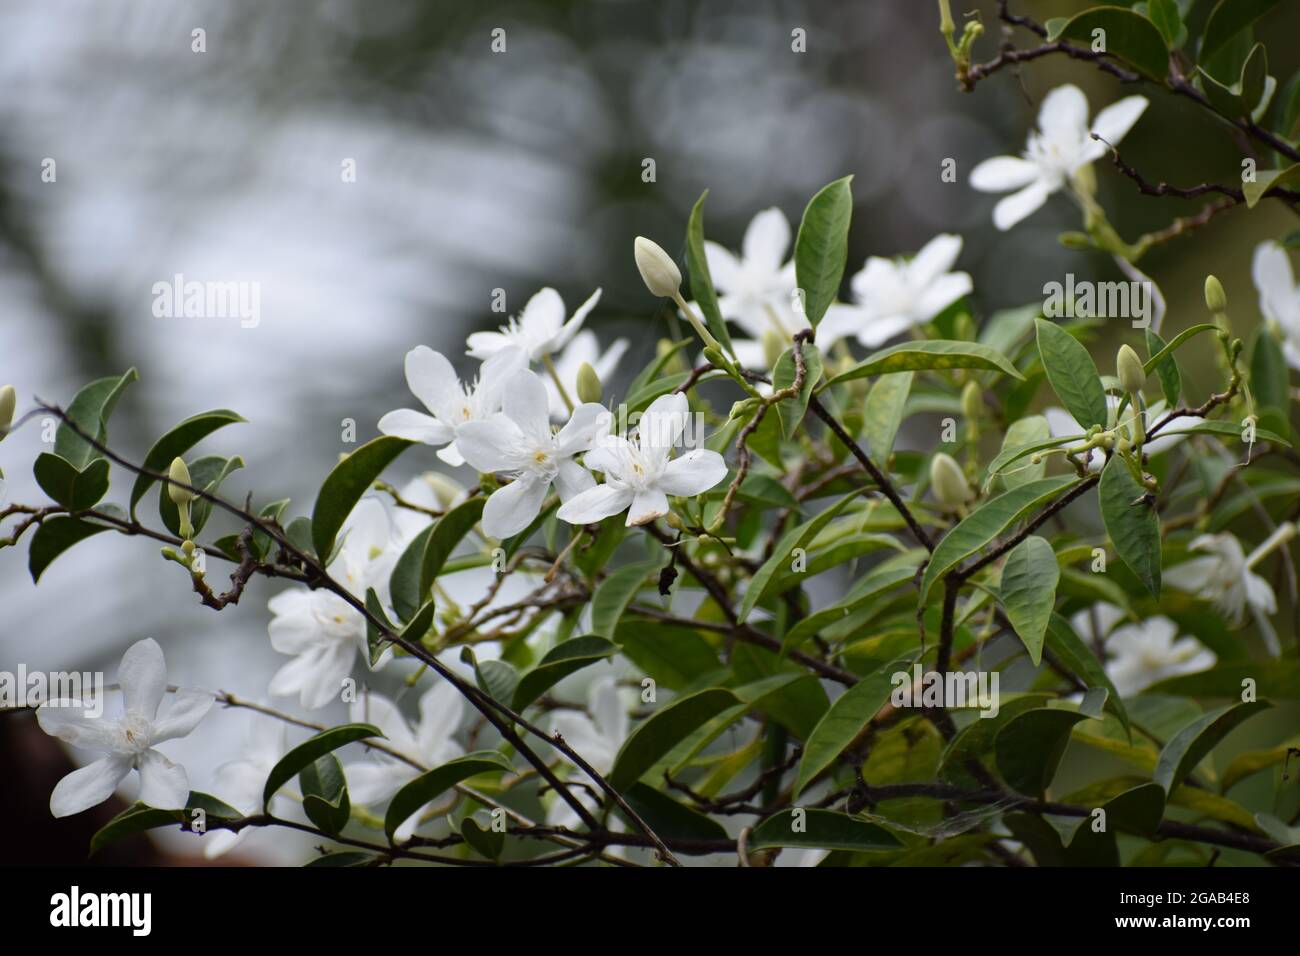 Cluster of white flowers in shiny blurred background, white beautiful coral swirl flowers in the garden Stock Photo